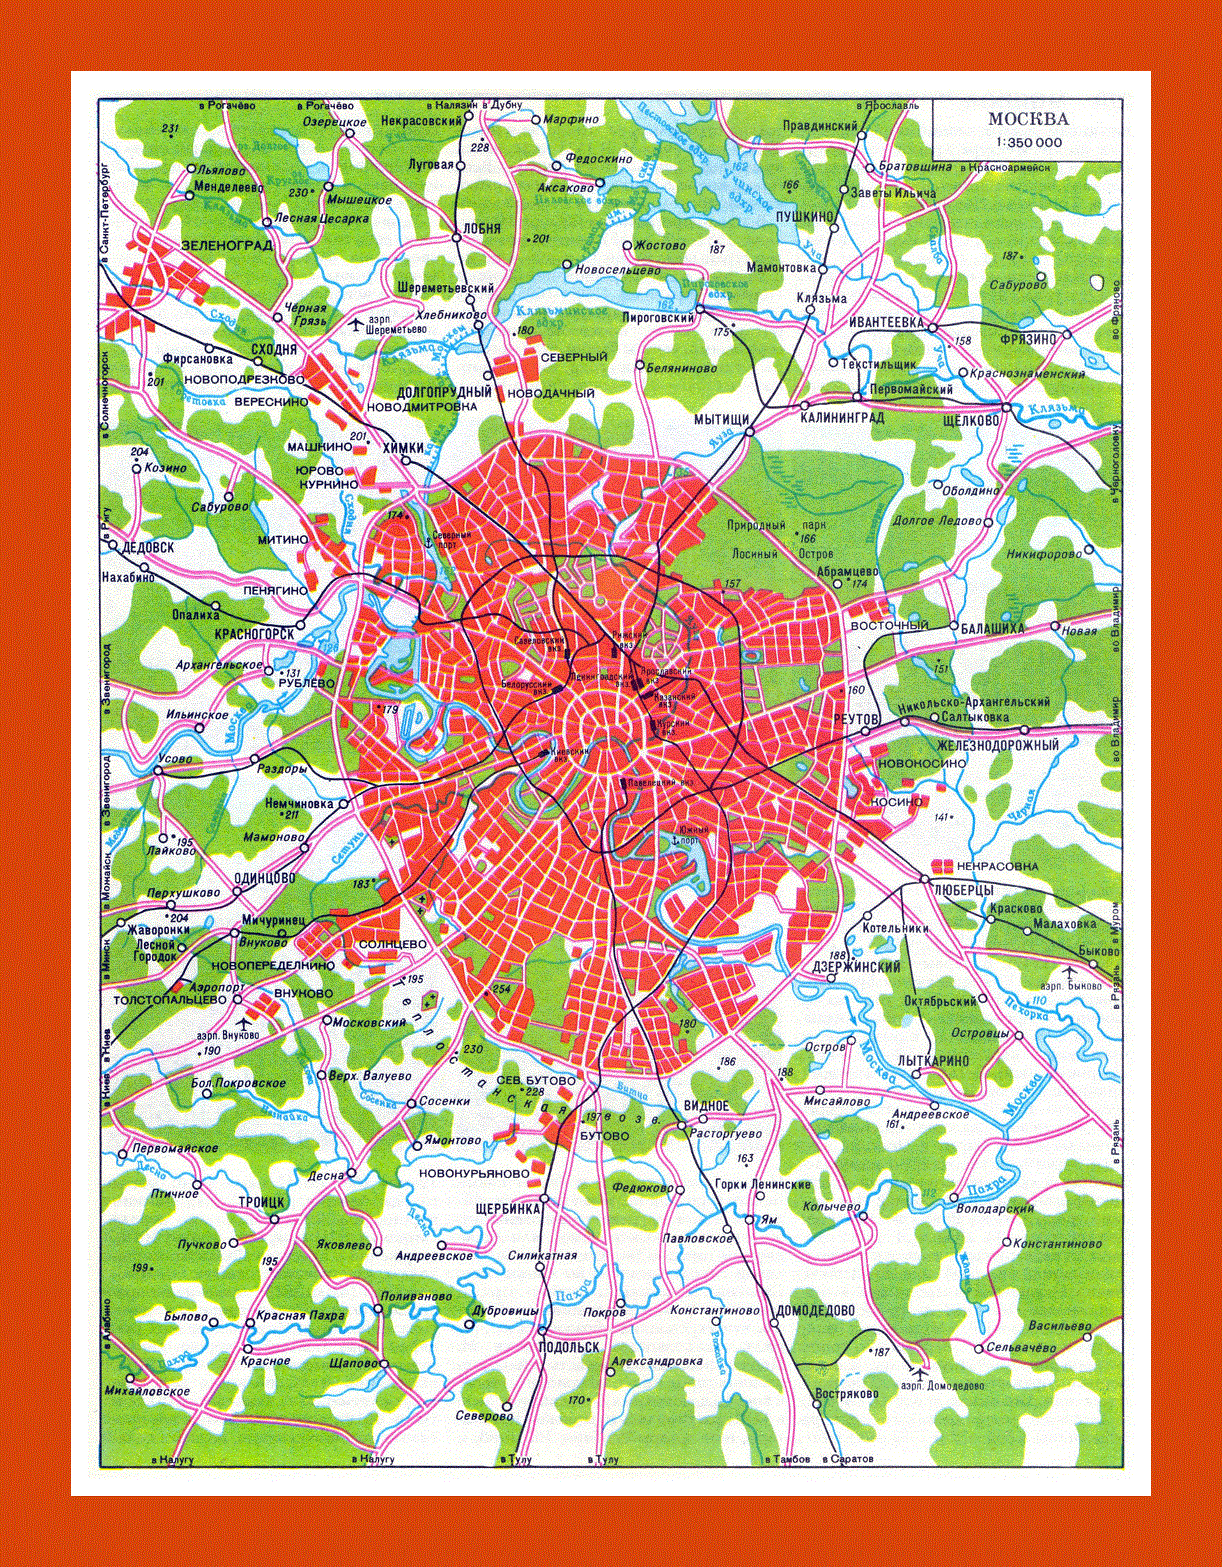 Transit map of Moscow city in russian